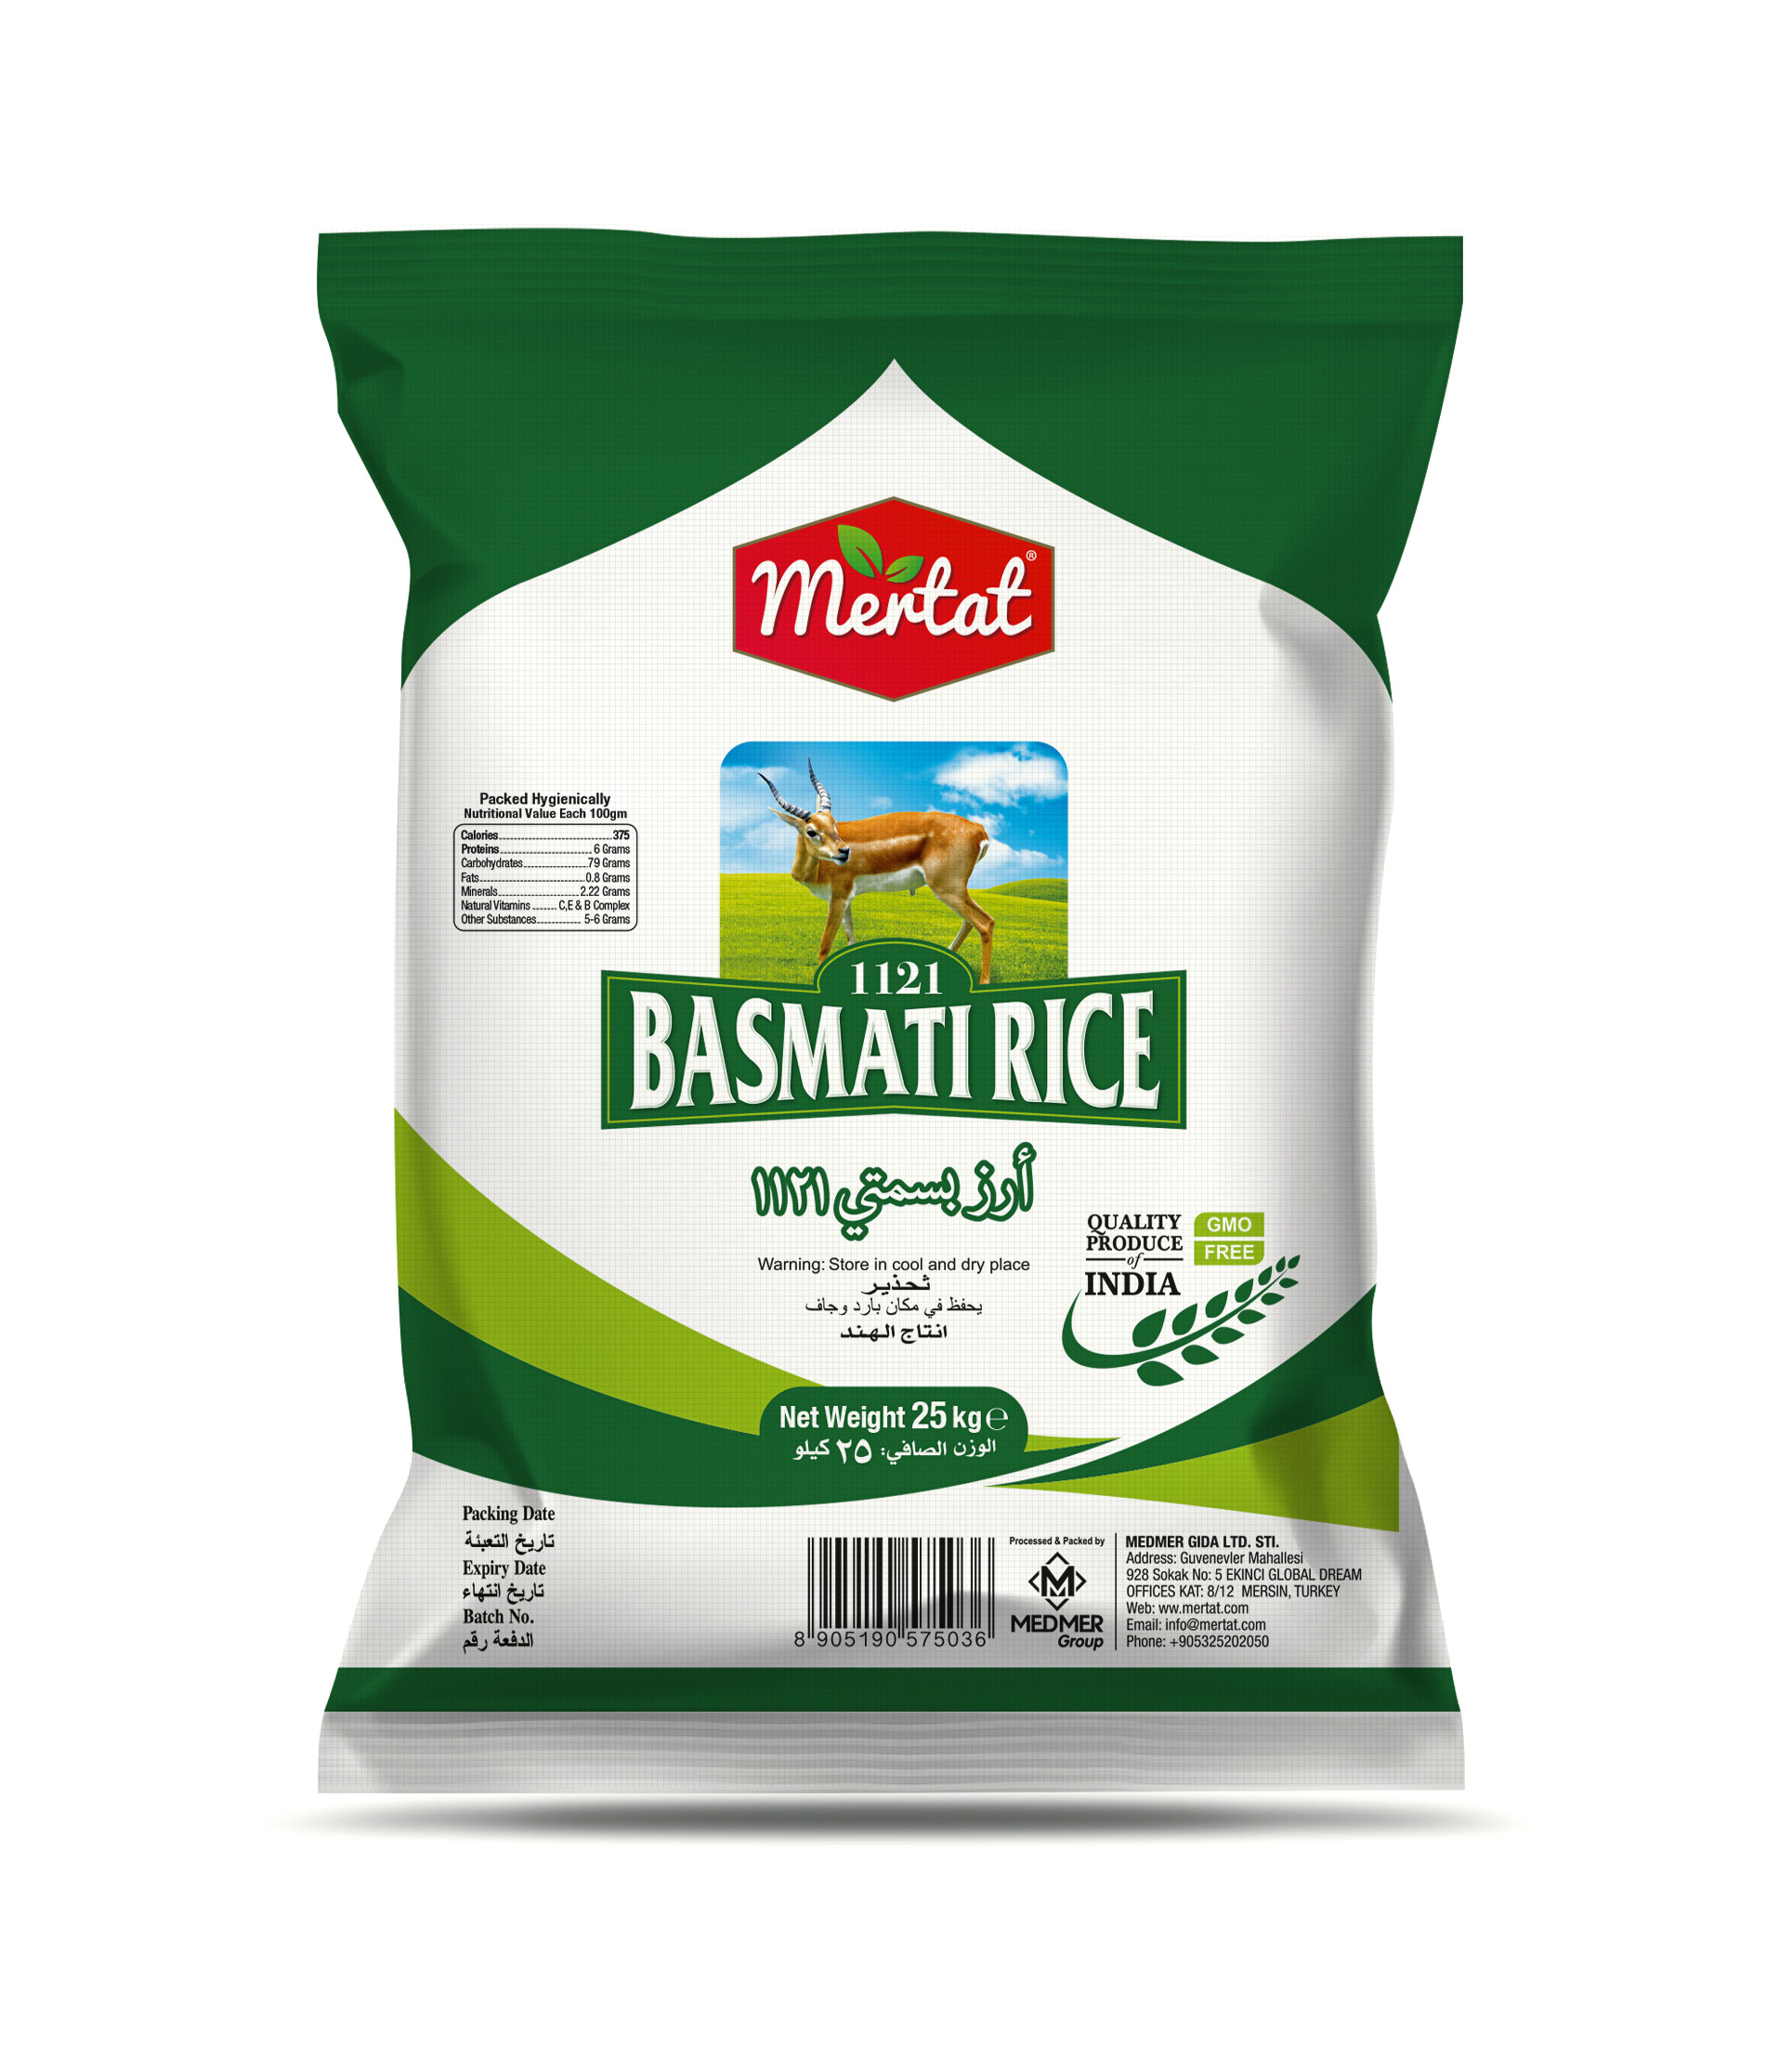 MERTAT - 1121 BASMATI RICE is available now.